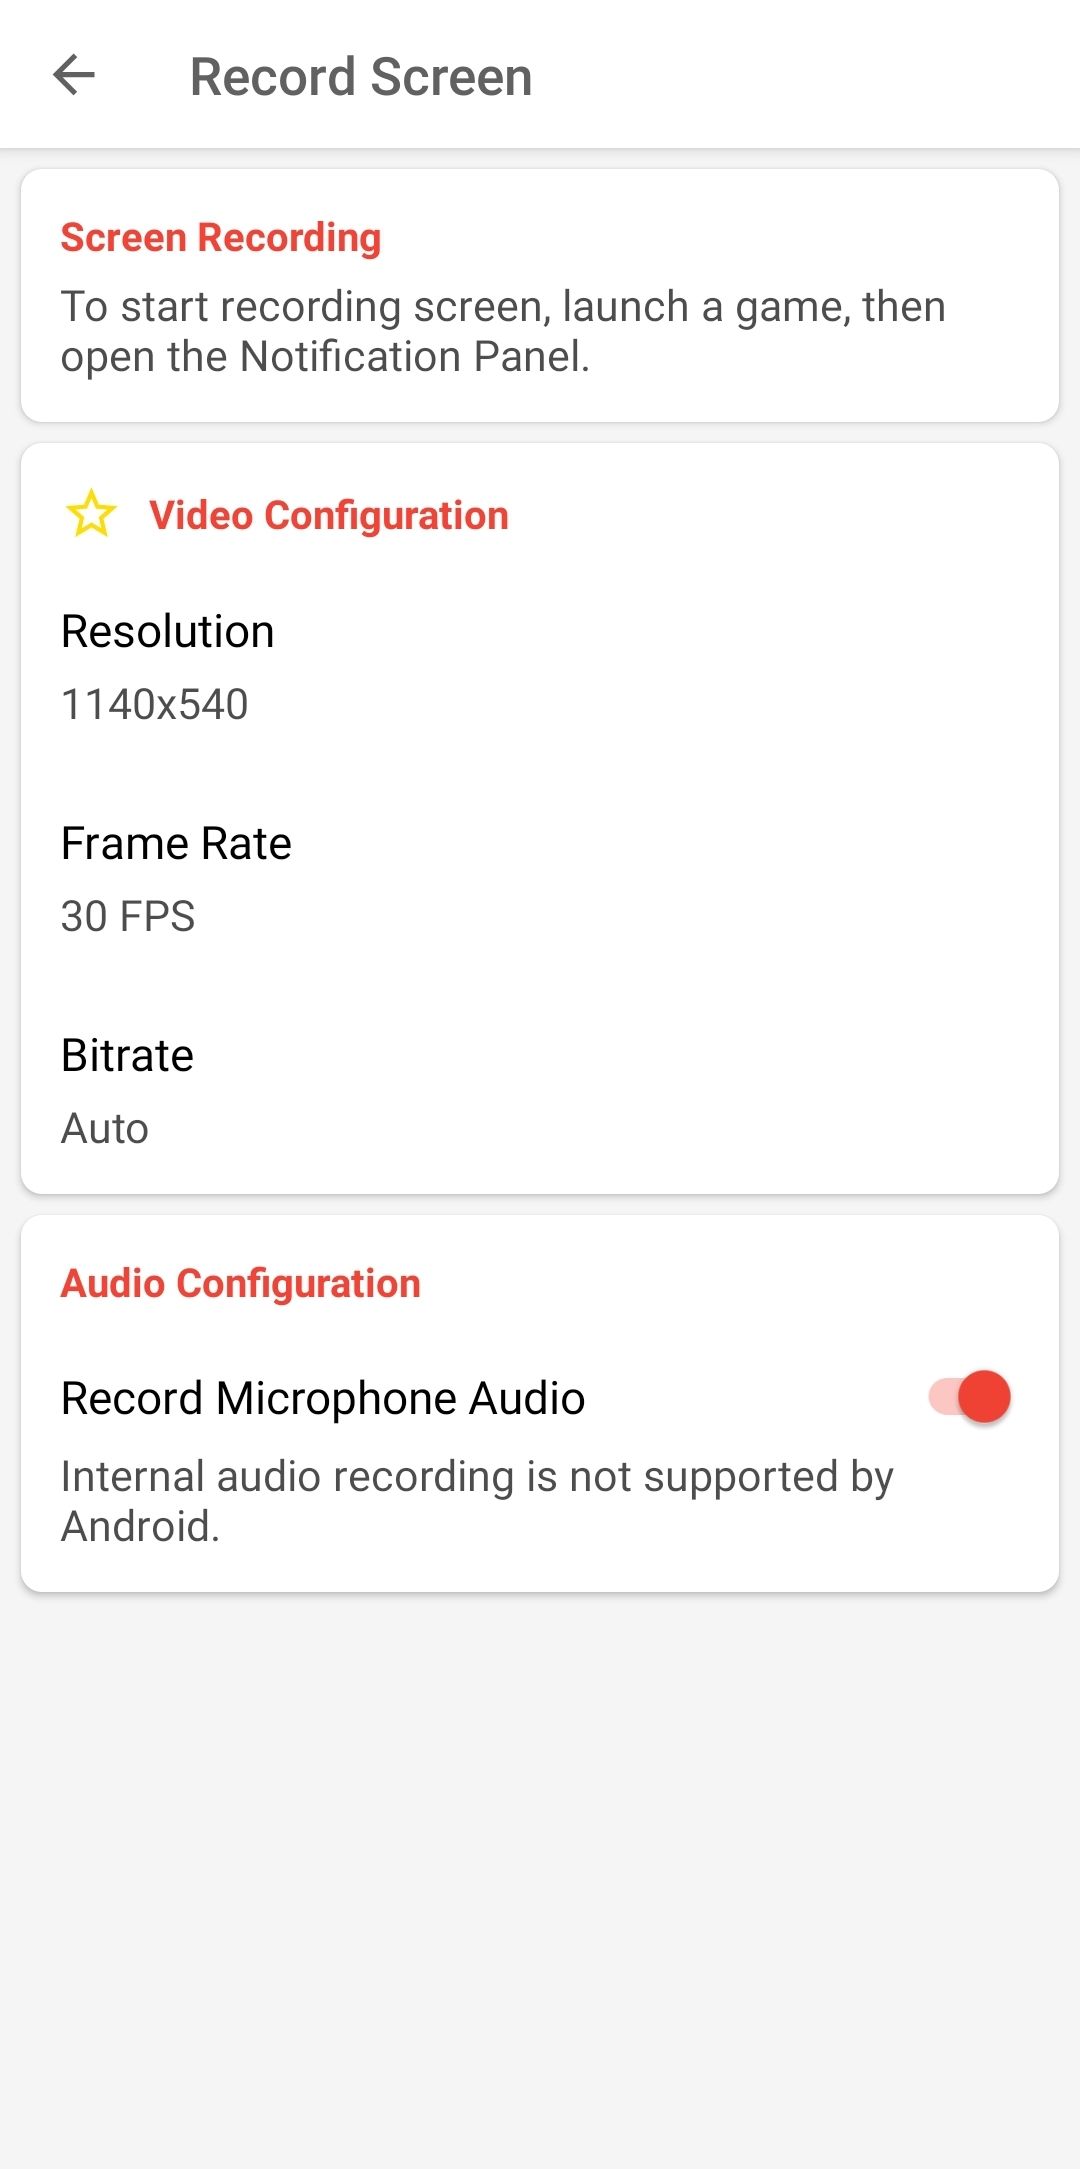 Games Launcher offers high-quality recording that can be improved more in Pro mode.